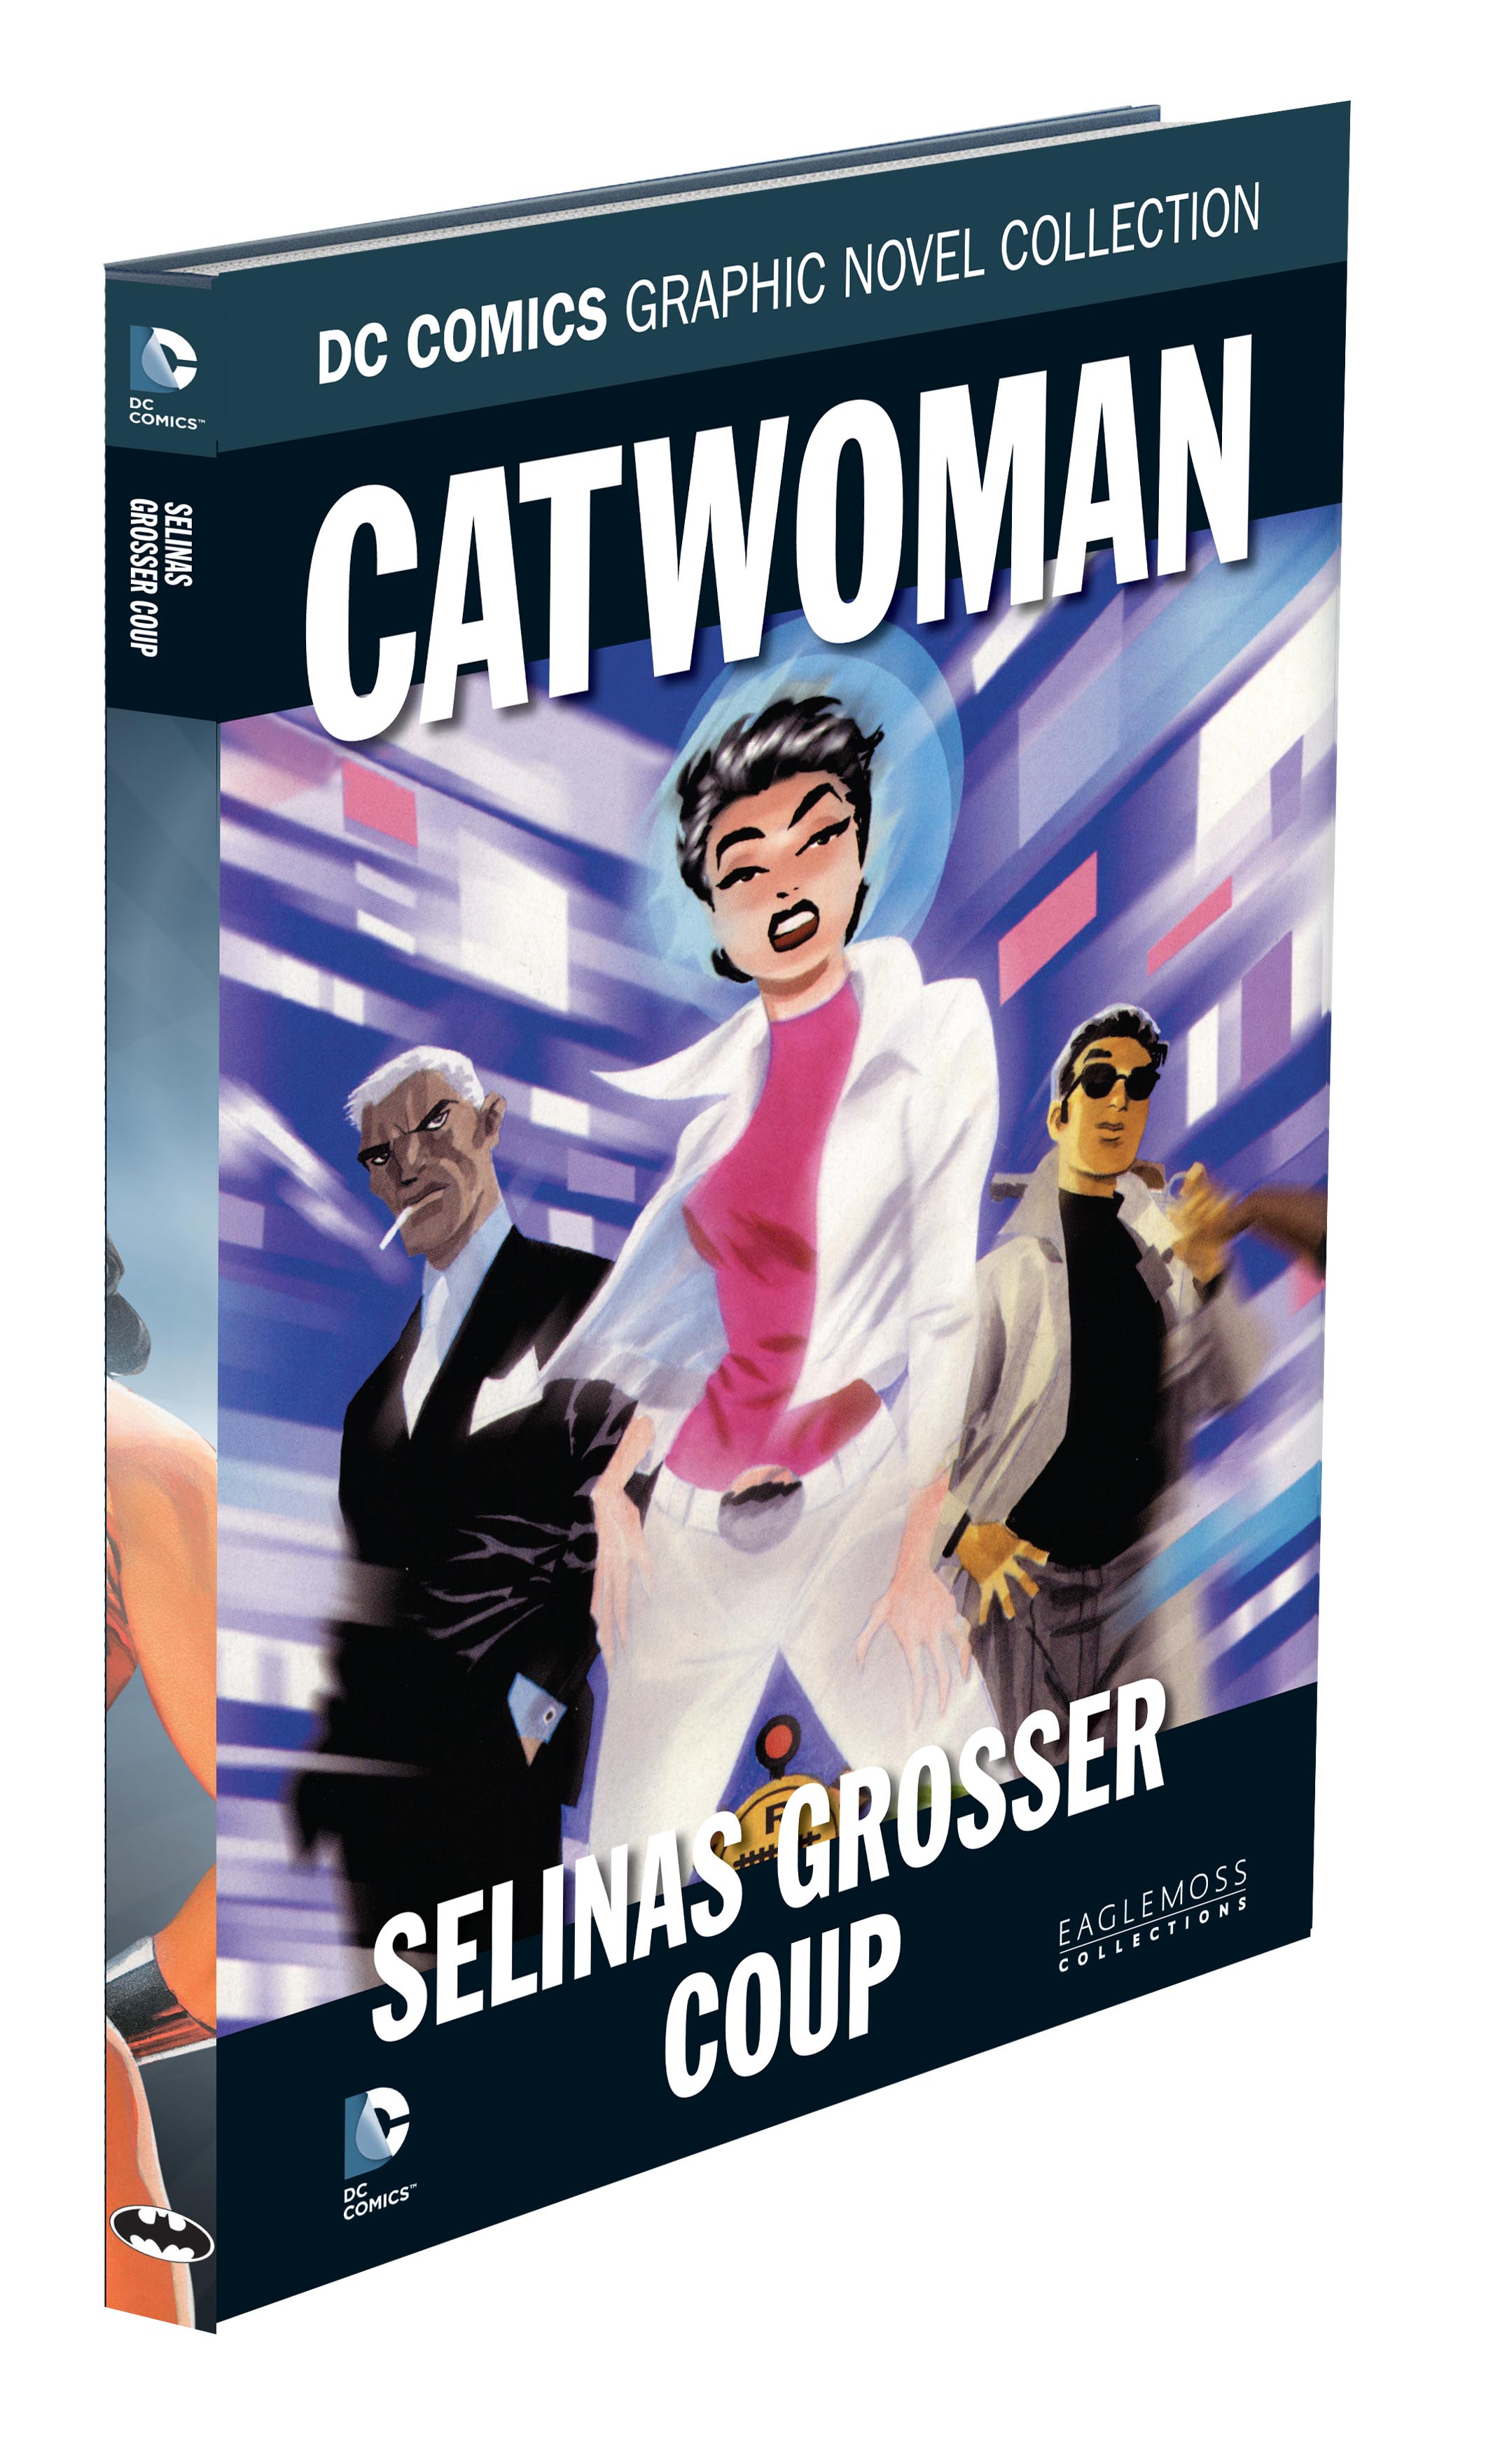 DC Comics Graphic Novel Collection Catwoman - Selinas Grosser Coup